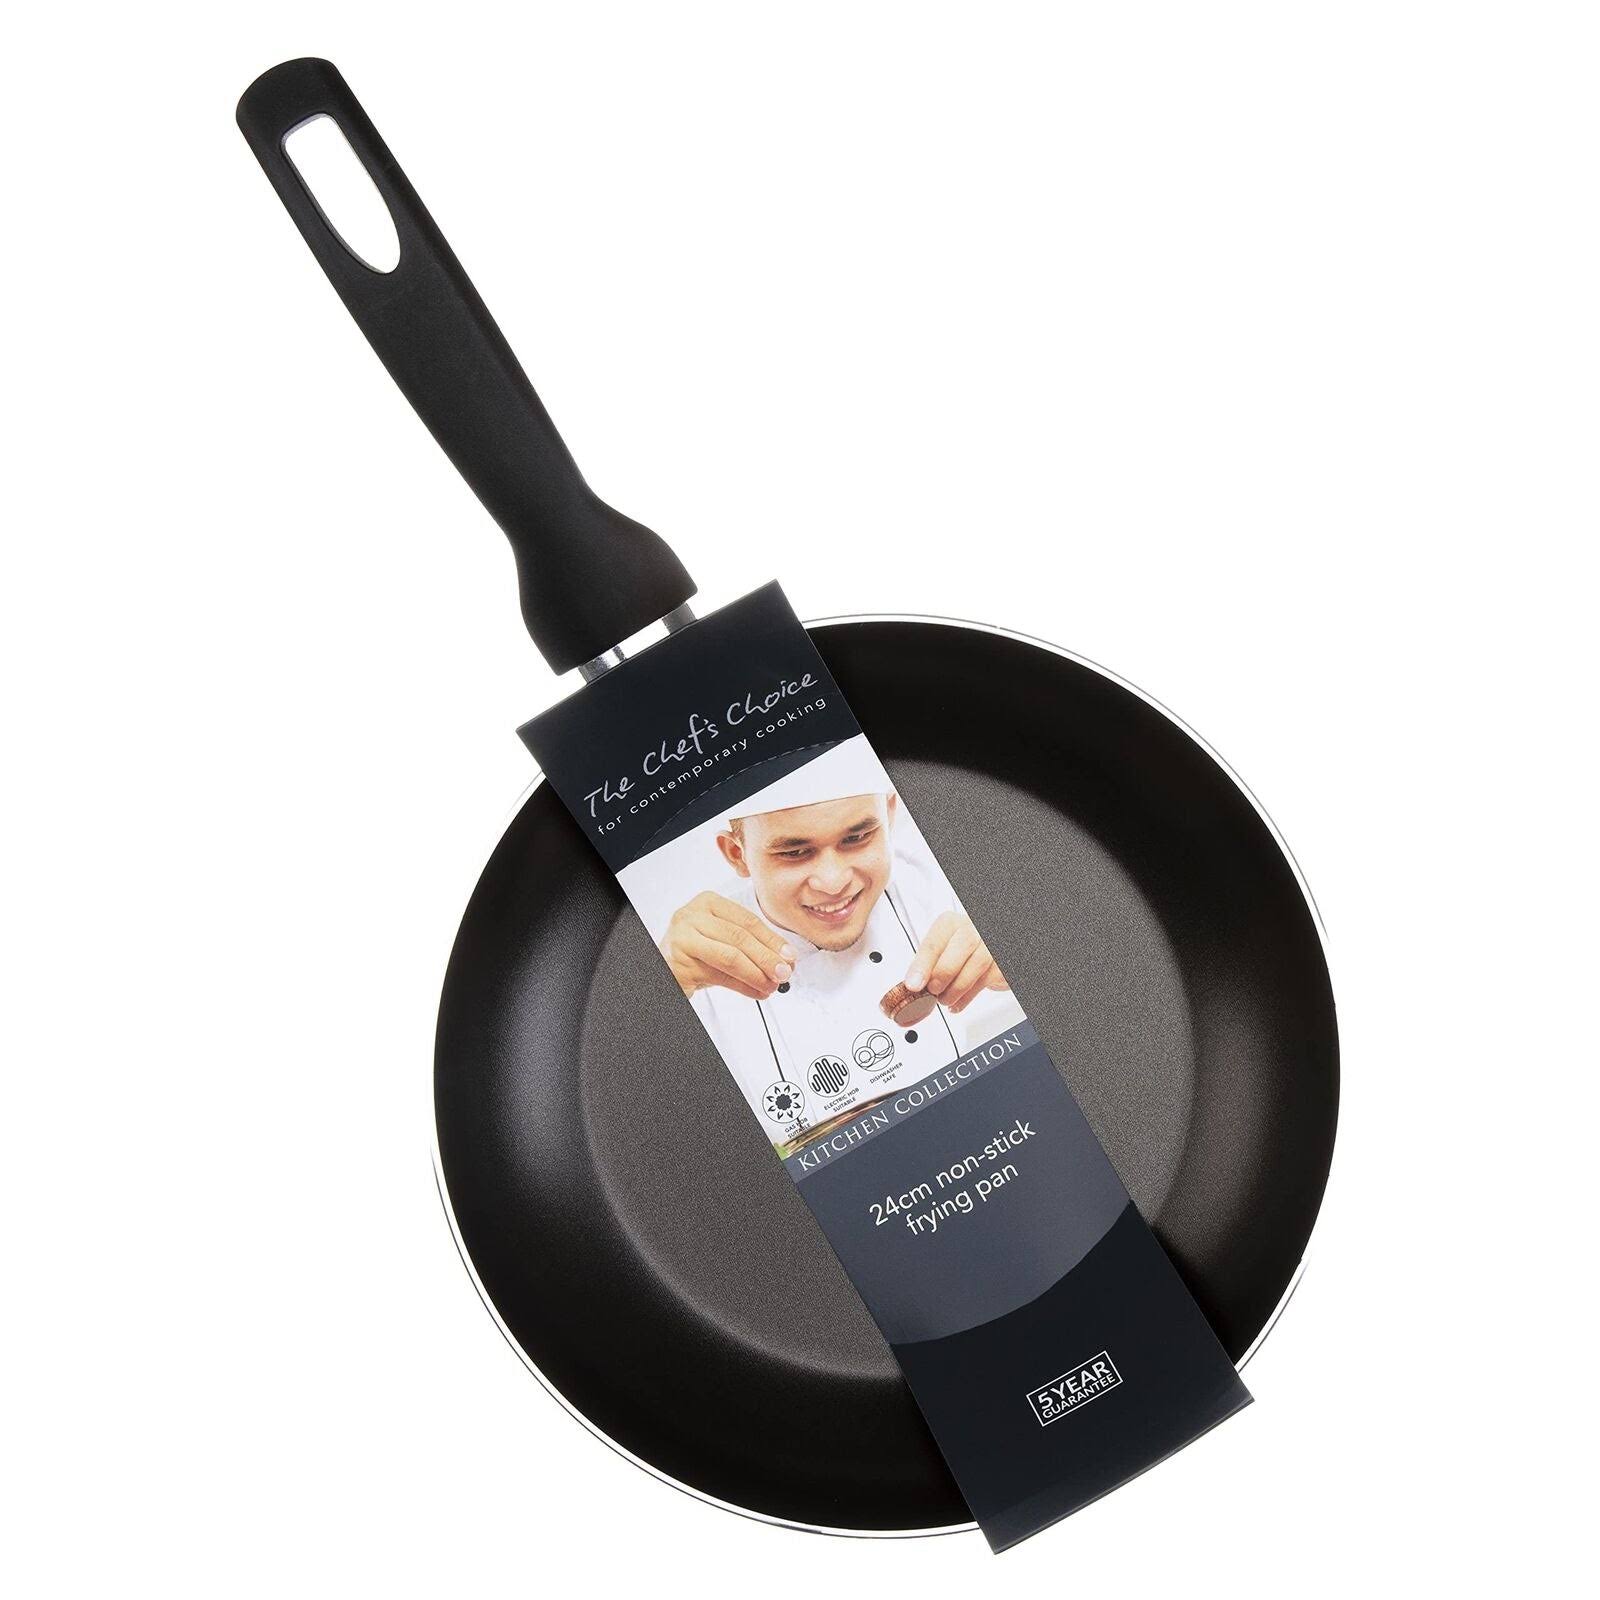 Pendeford The Chef's Choice Non Stick Fry Pan 24cm [P180]